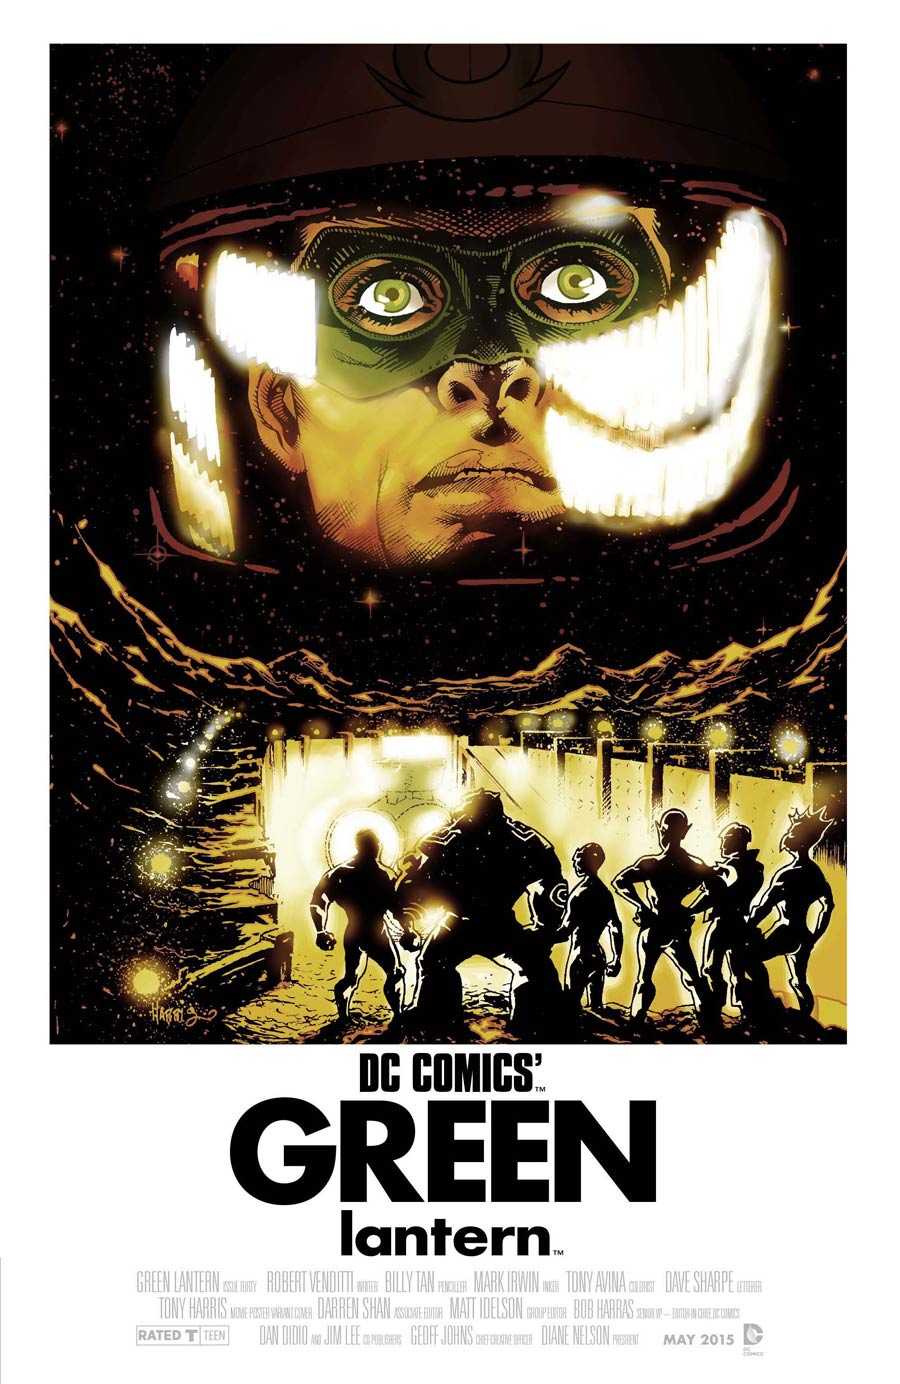 Green Lantern Vol 5 #40 Cover B Variant 2001 A Space Odyssey WB Movie Poster Cover